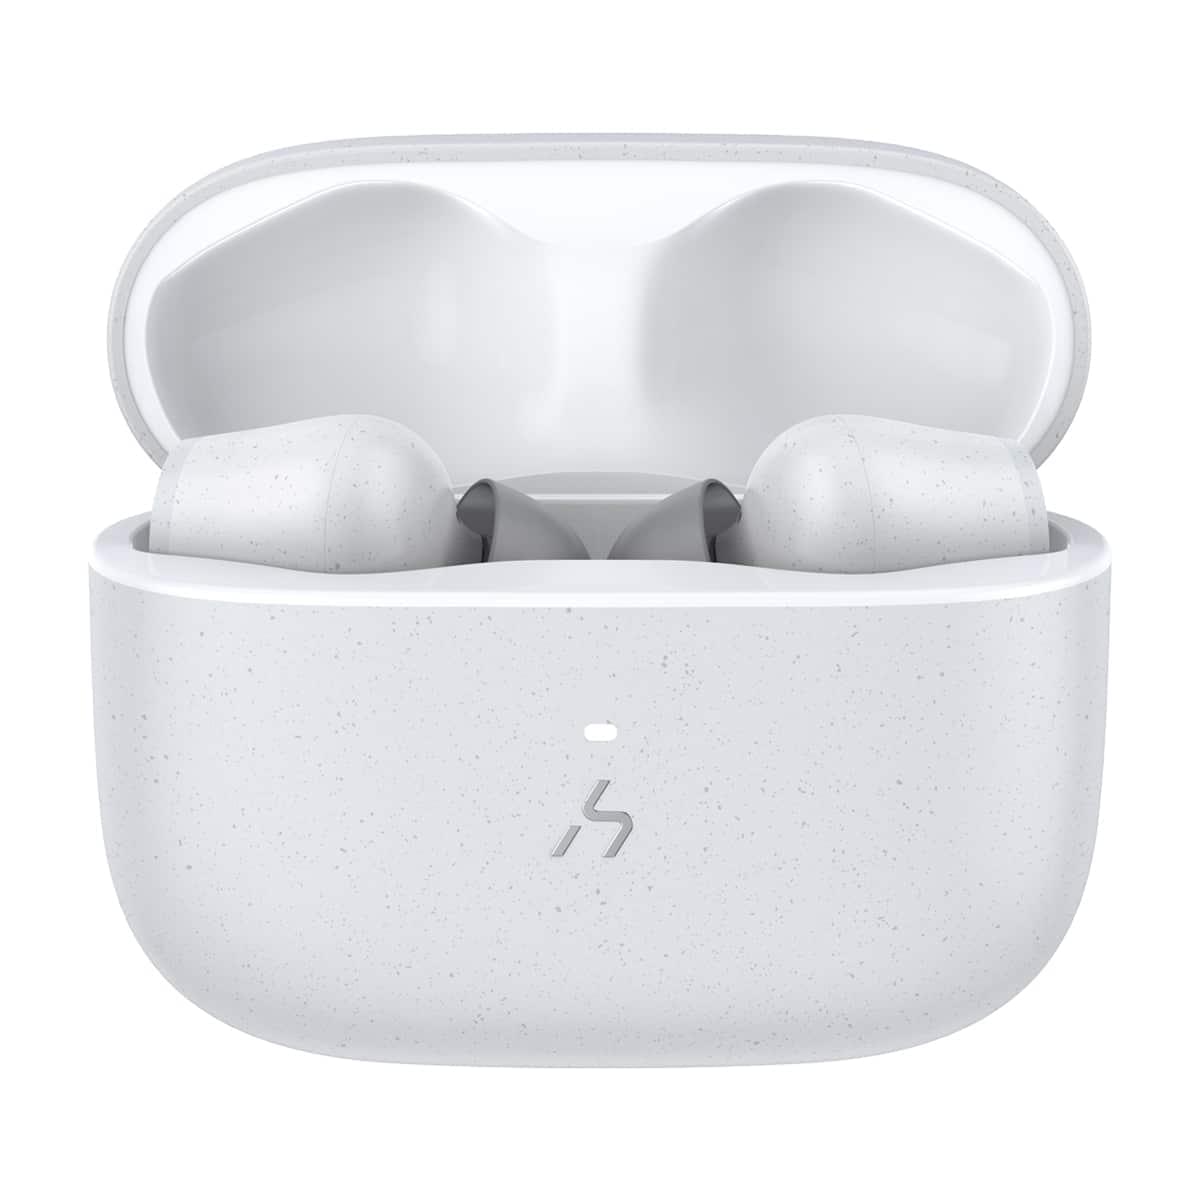 HAKII Time Pro Noise Cancelling True Wireless Earbuds (White)